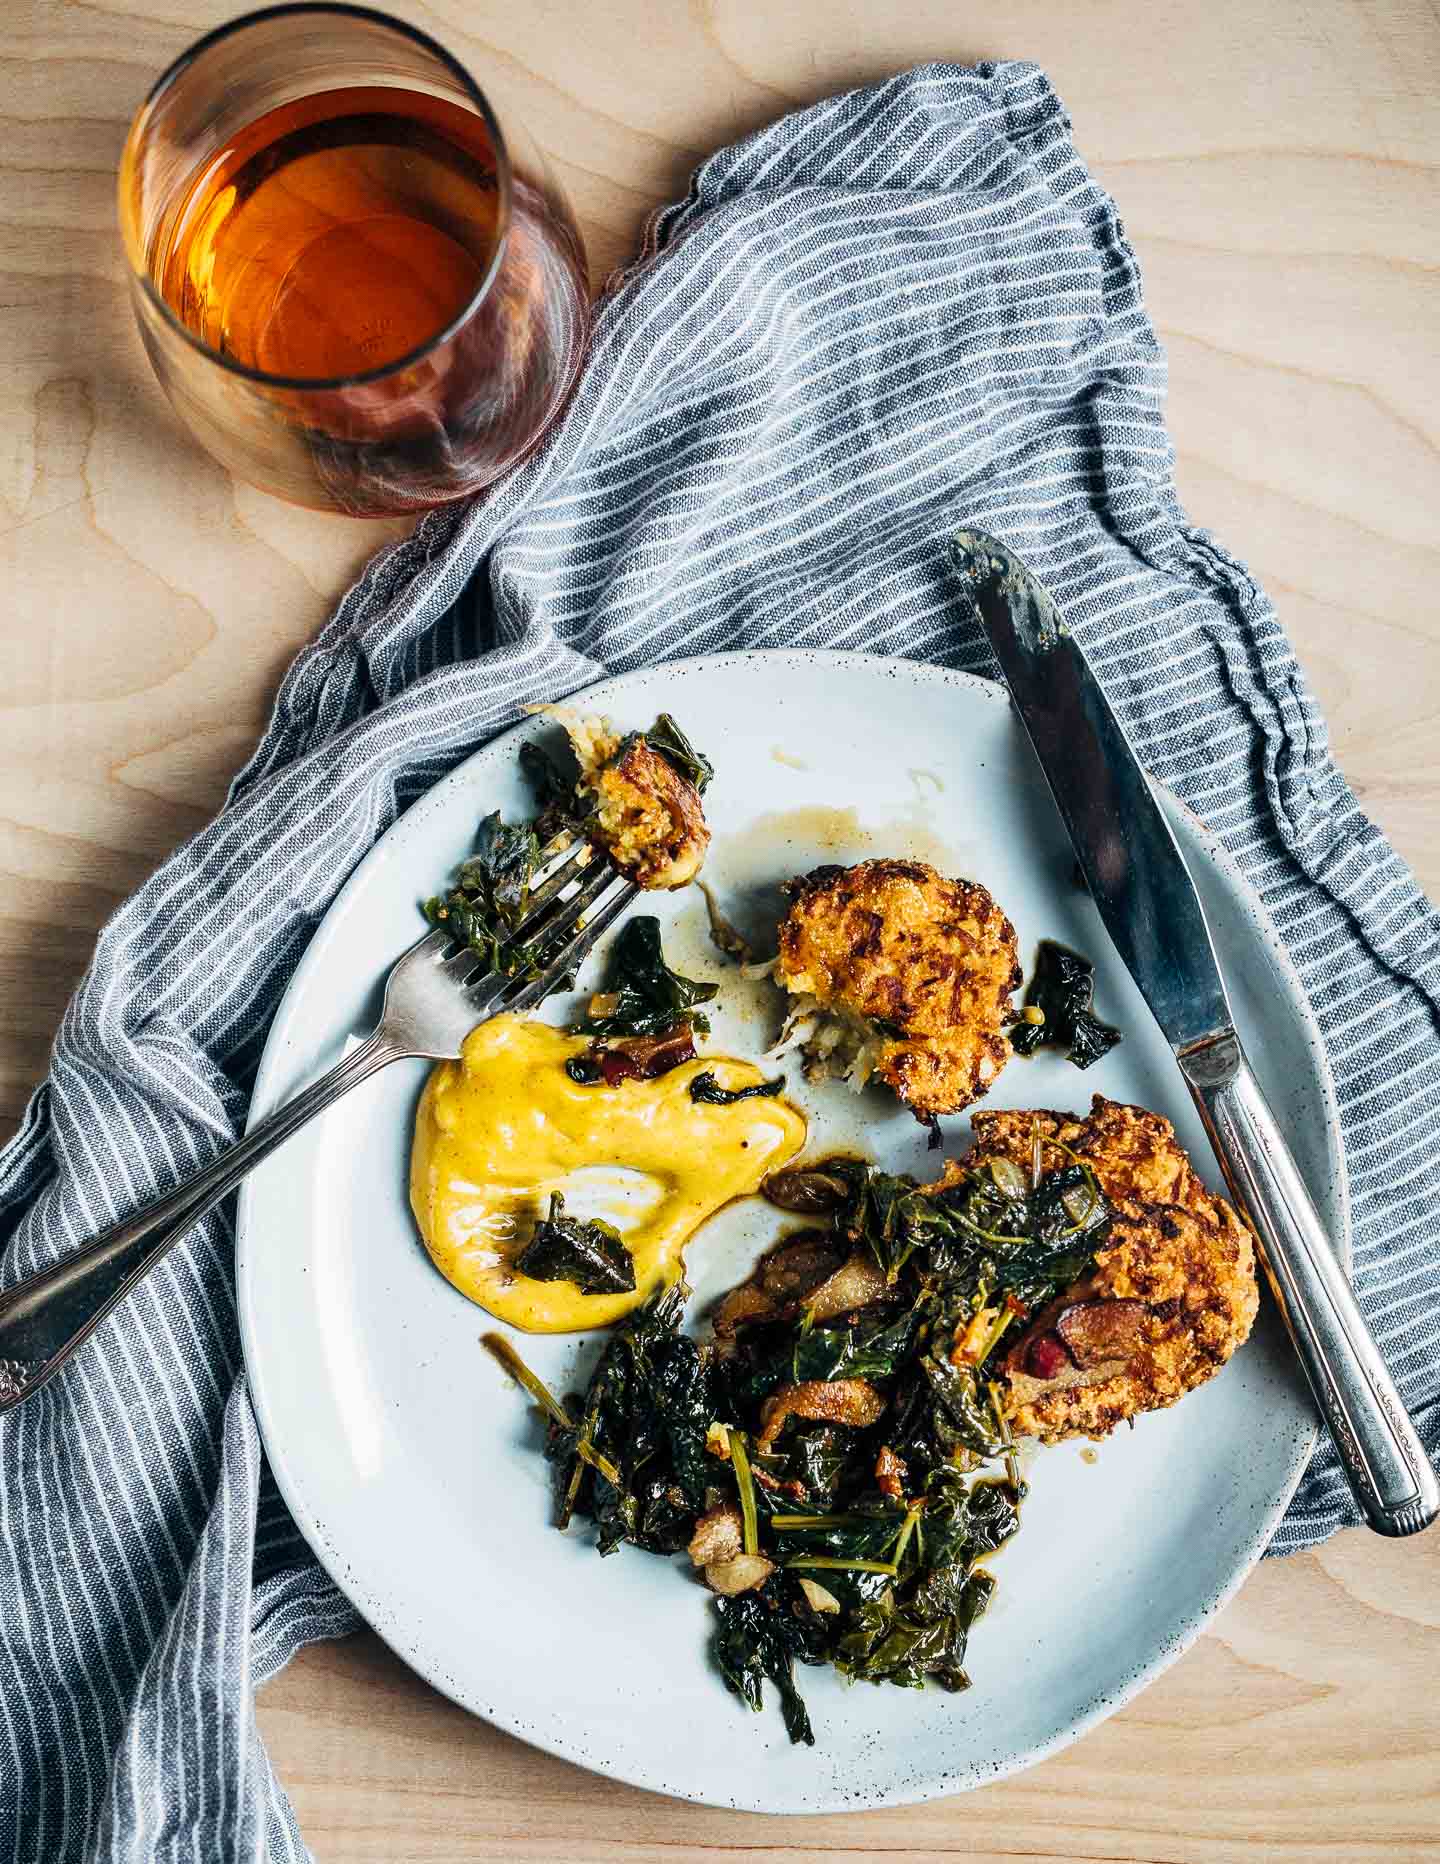 A simple recipe for turnip fritters topped with tender turnip greens, and served alongside pimenton aioli.